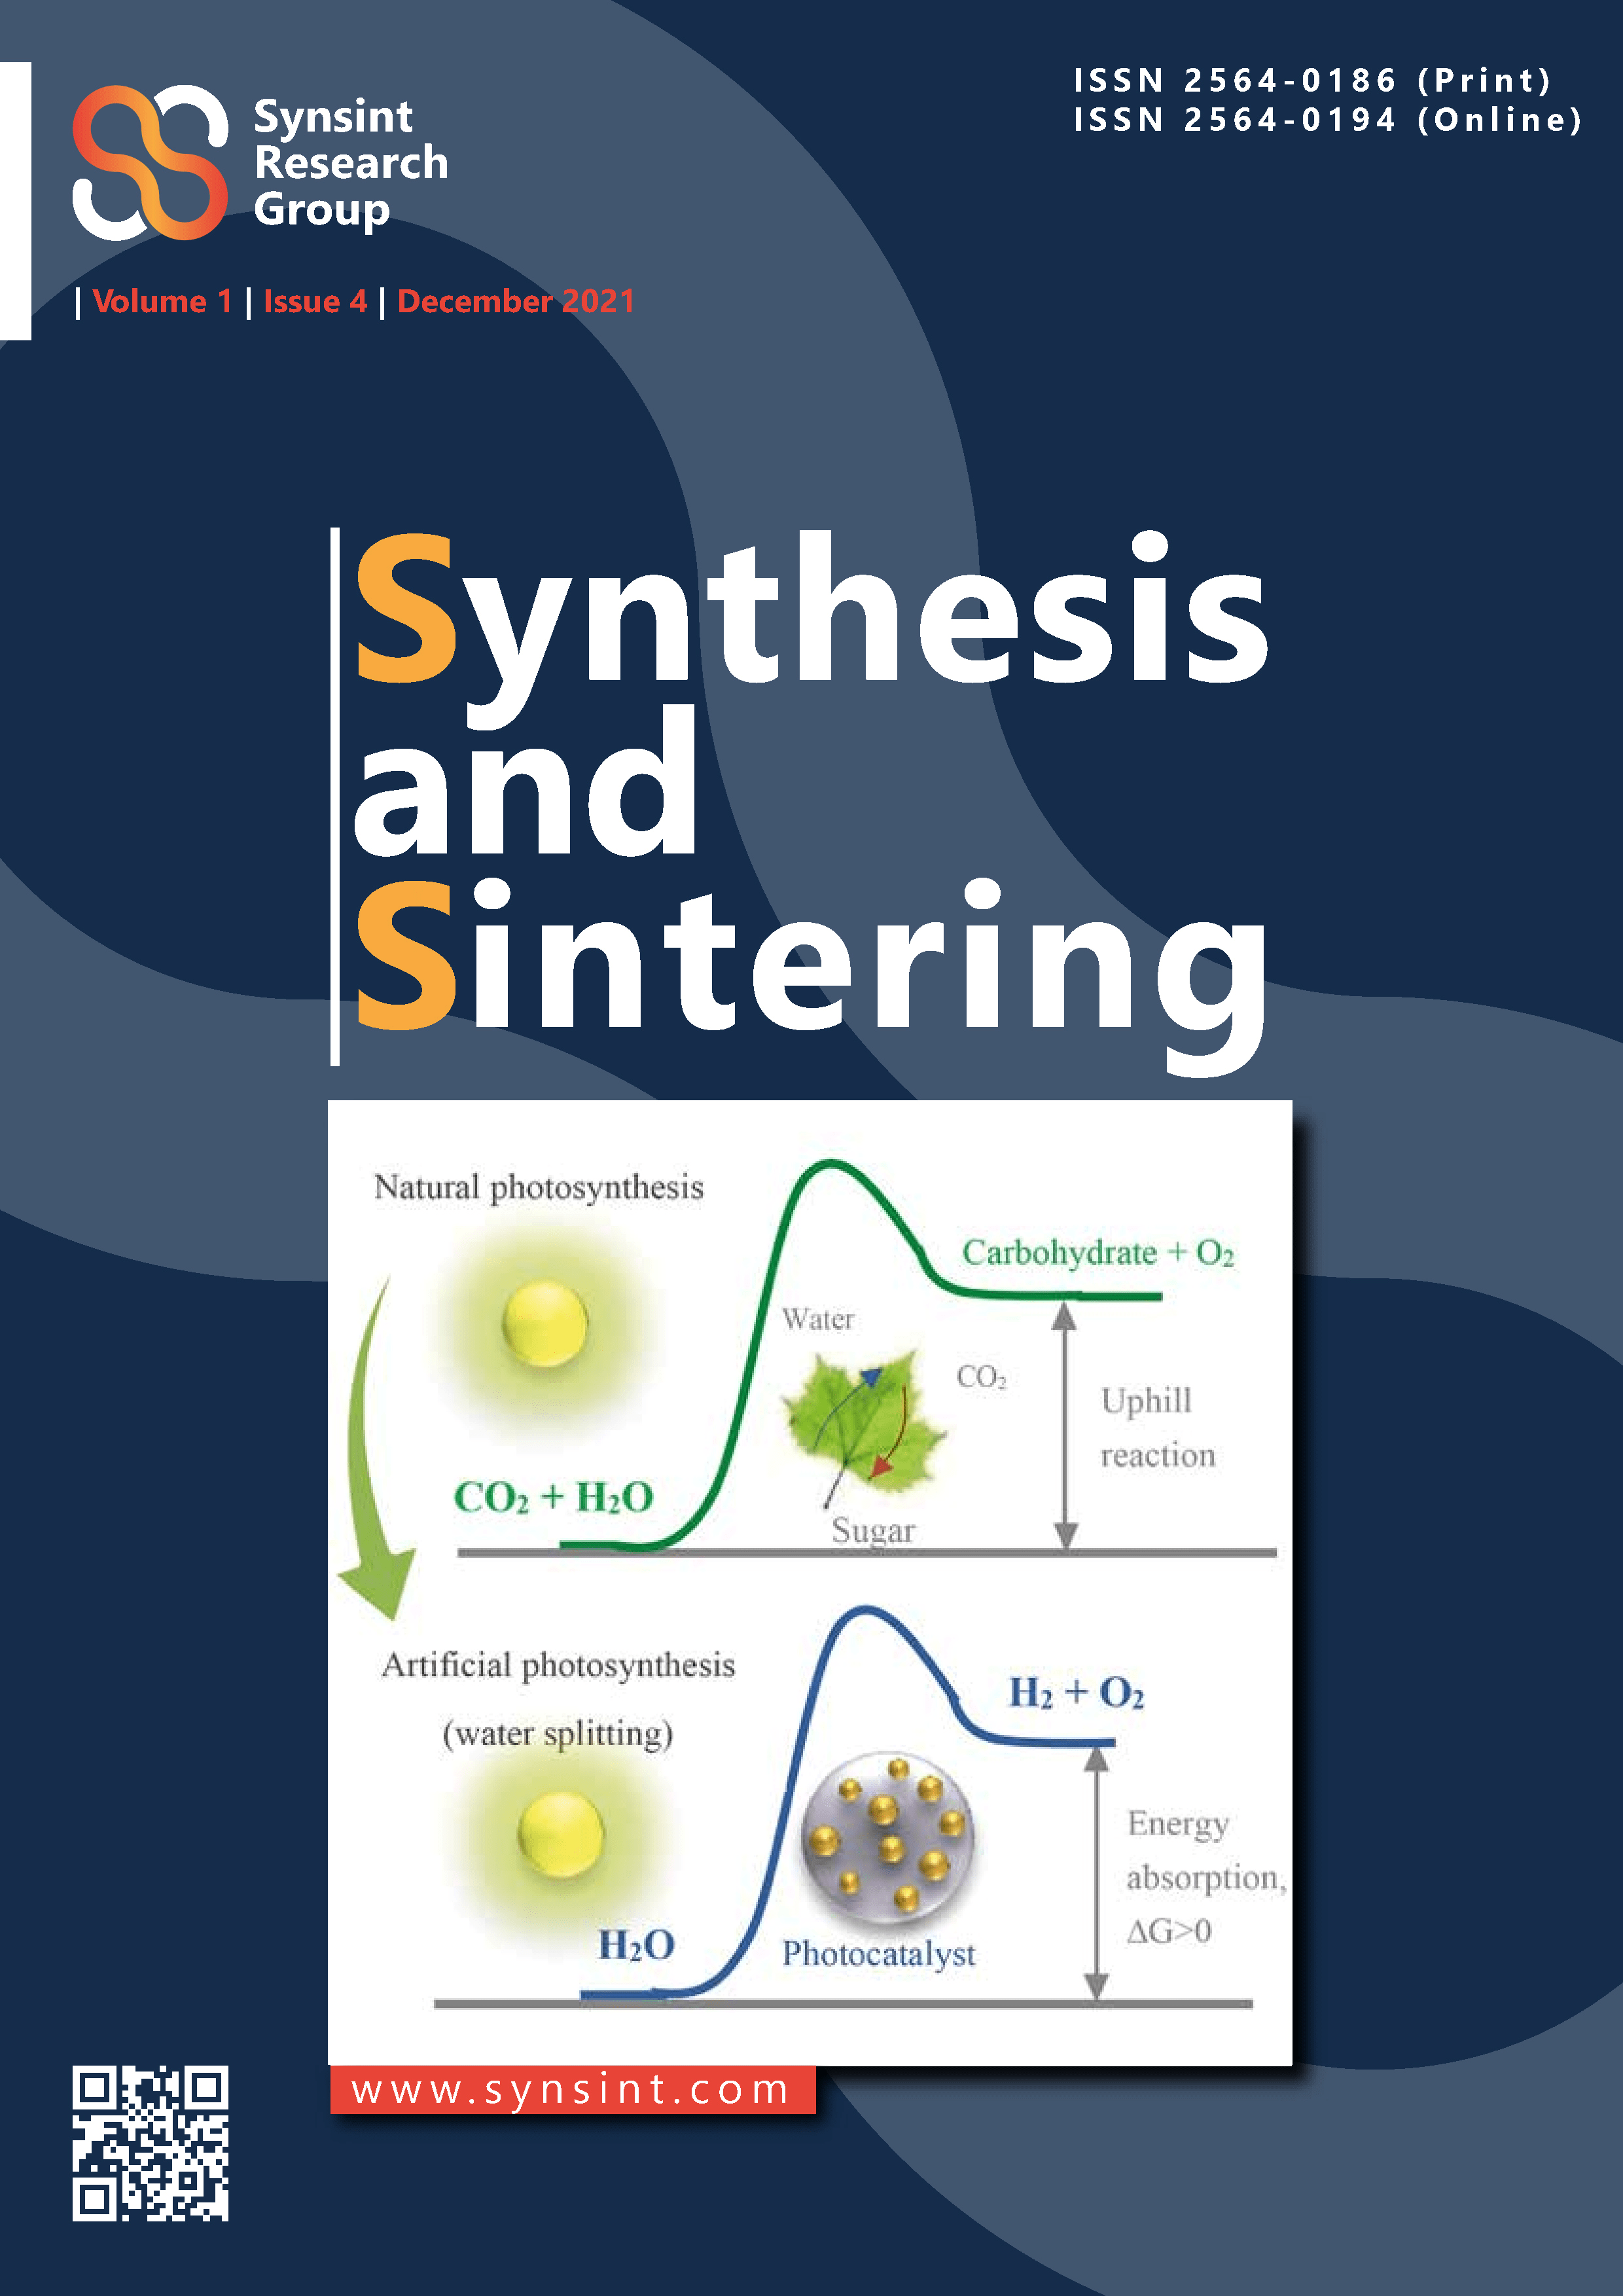 Synthesis and Sintering, Vol. 1, No. 4, 2021